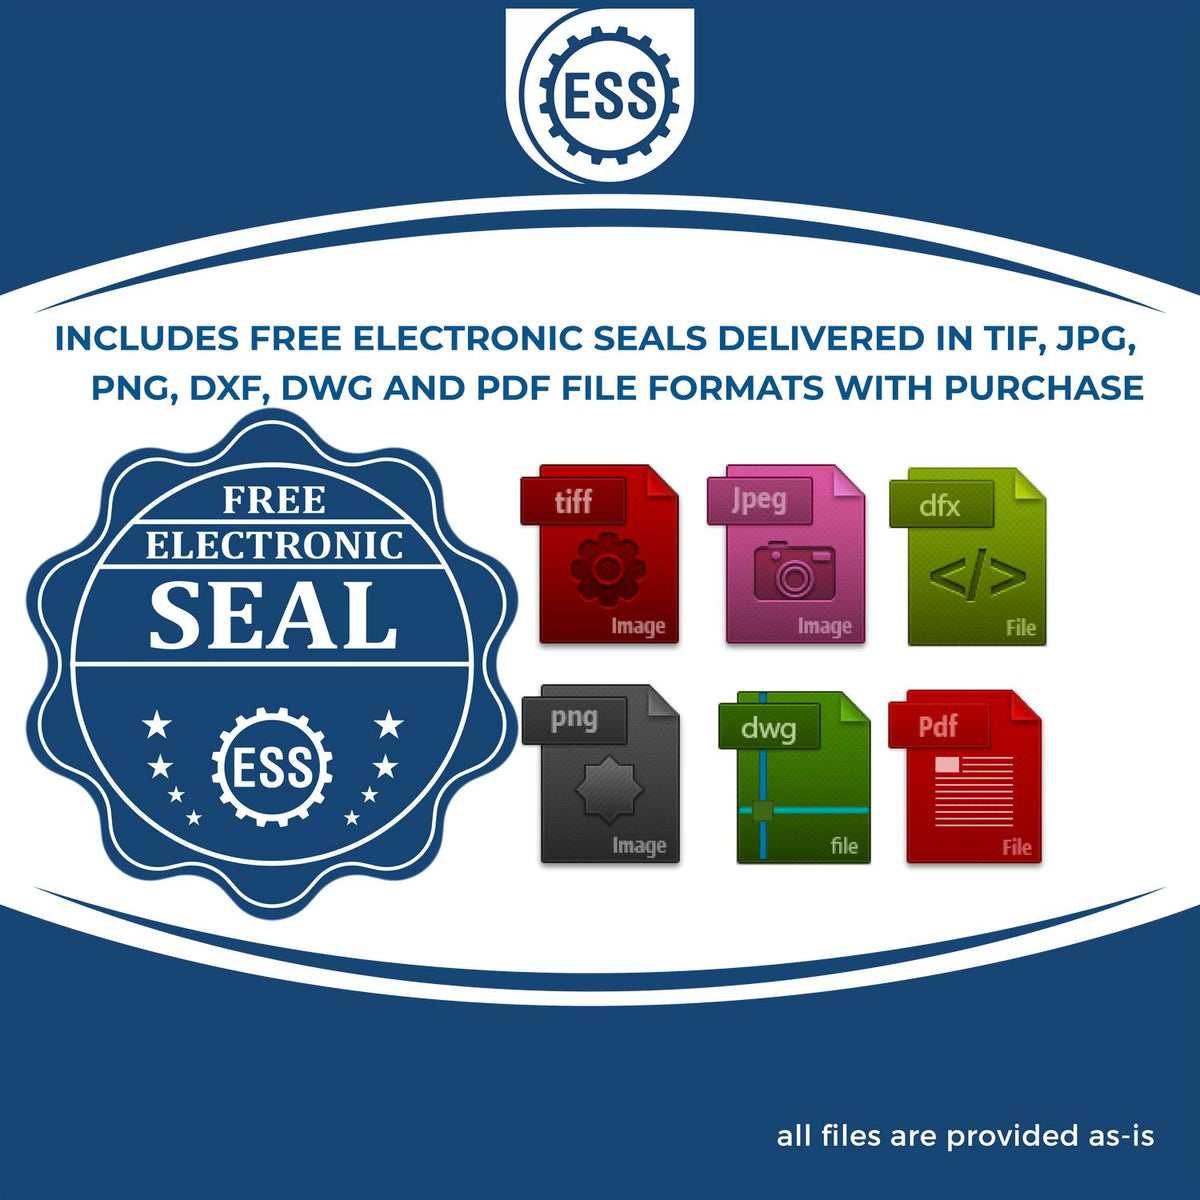 An infographic for the free electronic seal for the Hybrid Mississippi Architect Seal illustrating the different file type icons such as DXF, DWG, TIF, JPG and PNG.